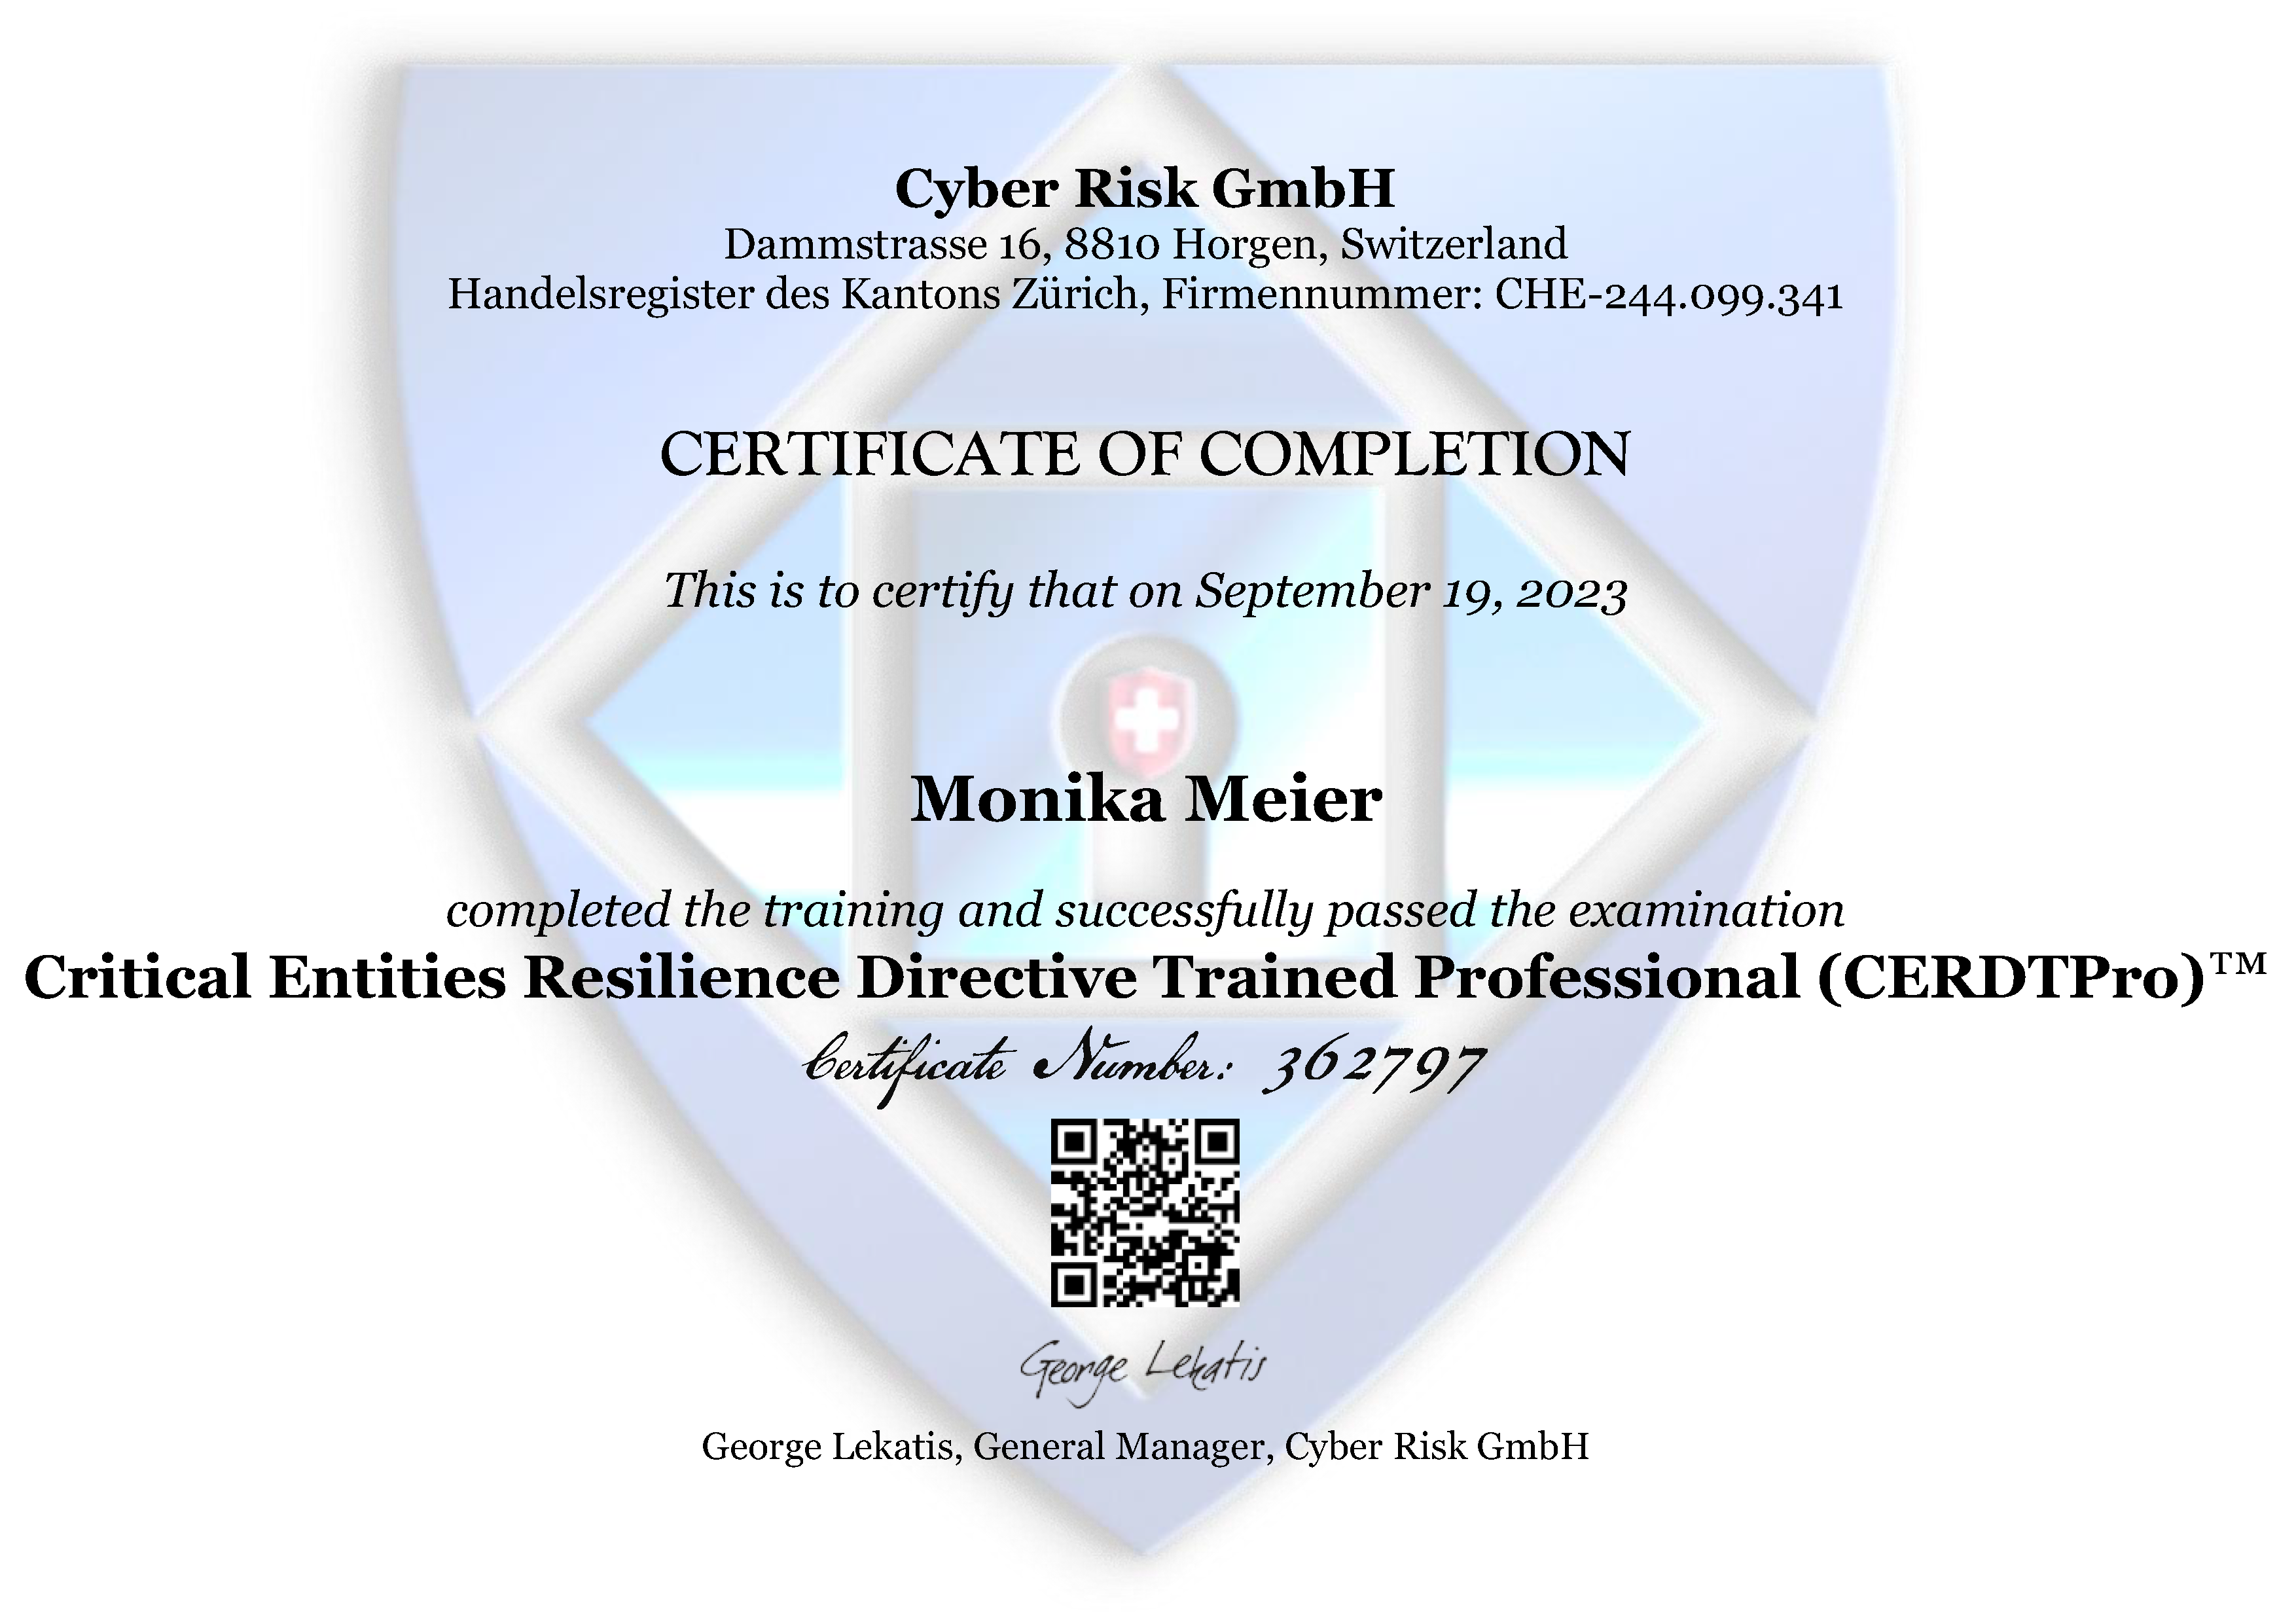 Critical Entities Resilience Directive Trained Professional (CERDTPro)